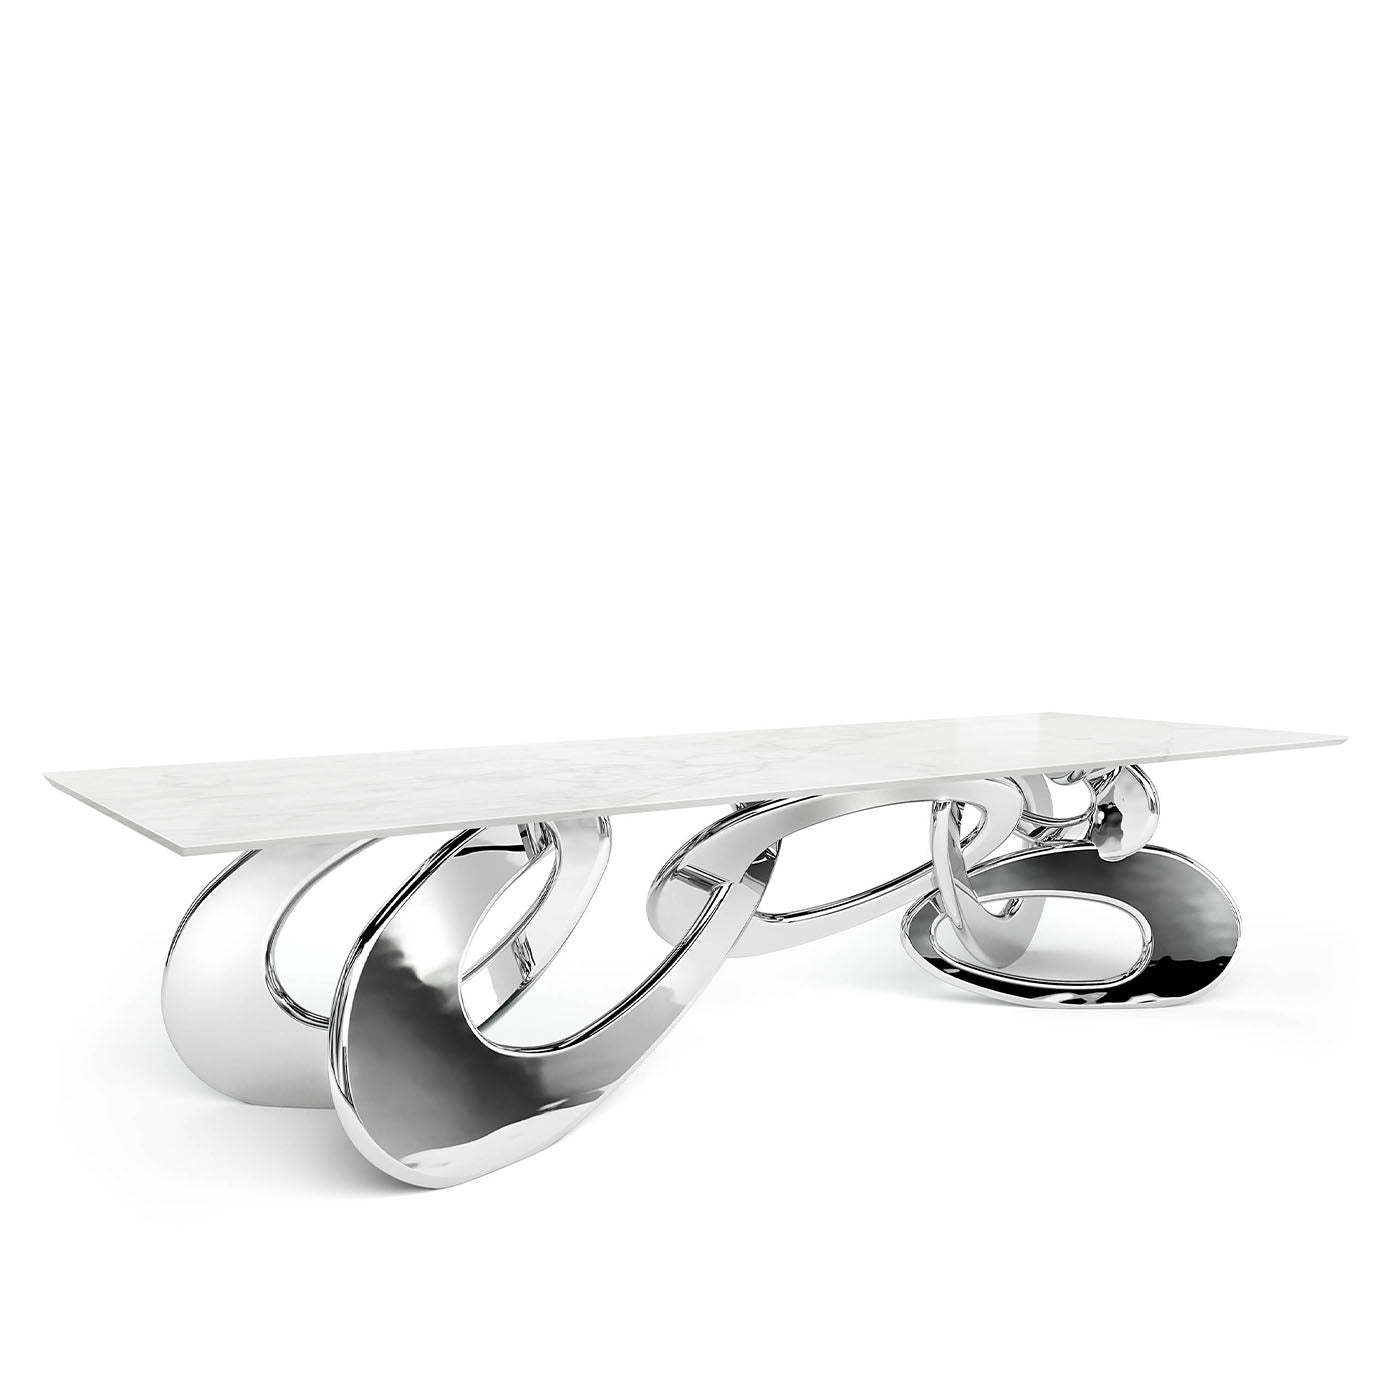 Chained Up Miami Dining Table - Alternative view 5